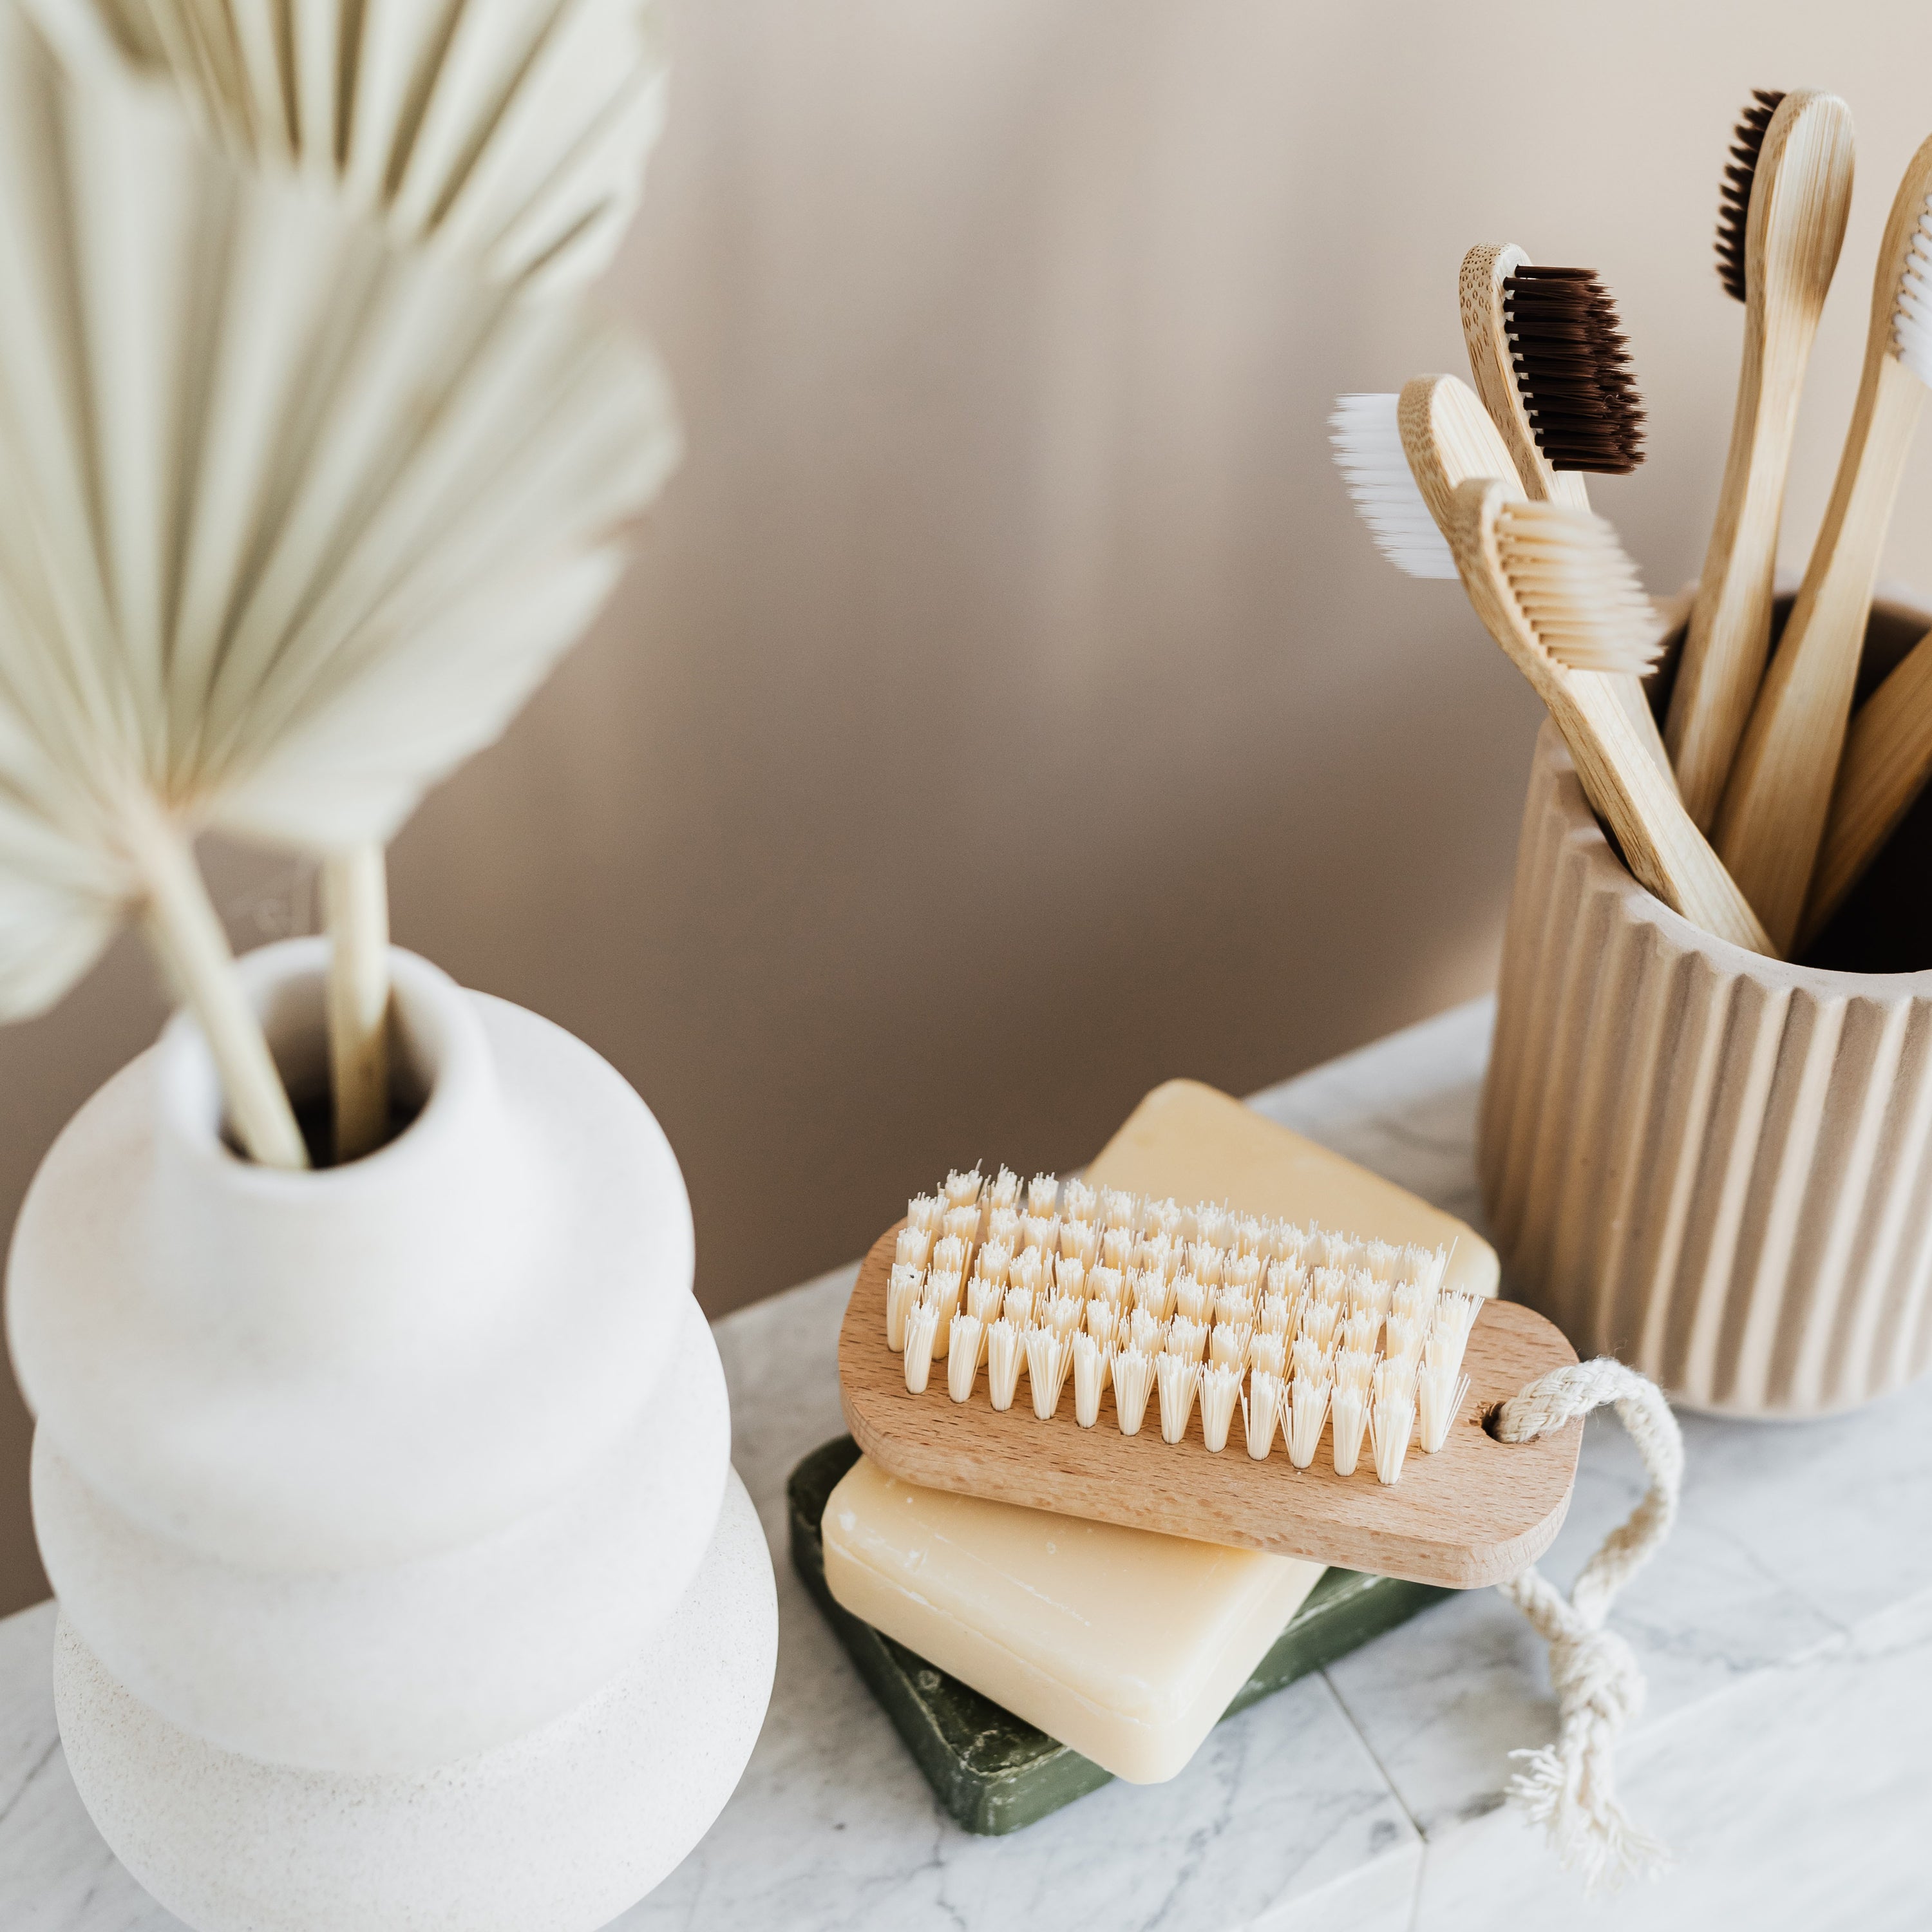 Tips to make your bathroom truly sustainable